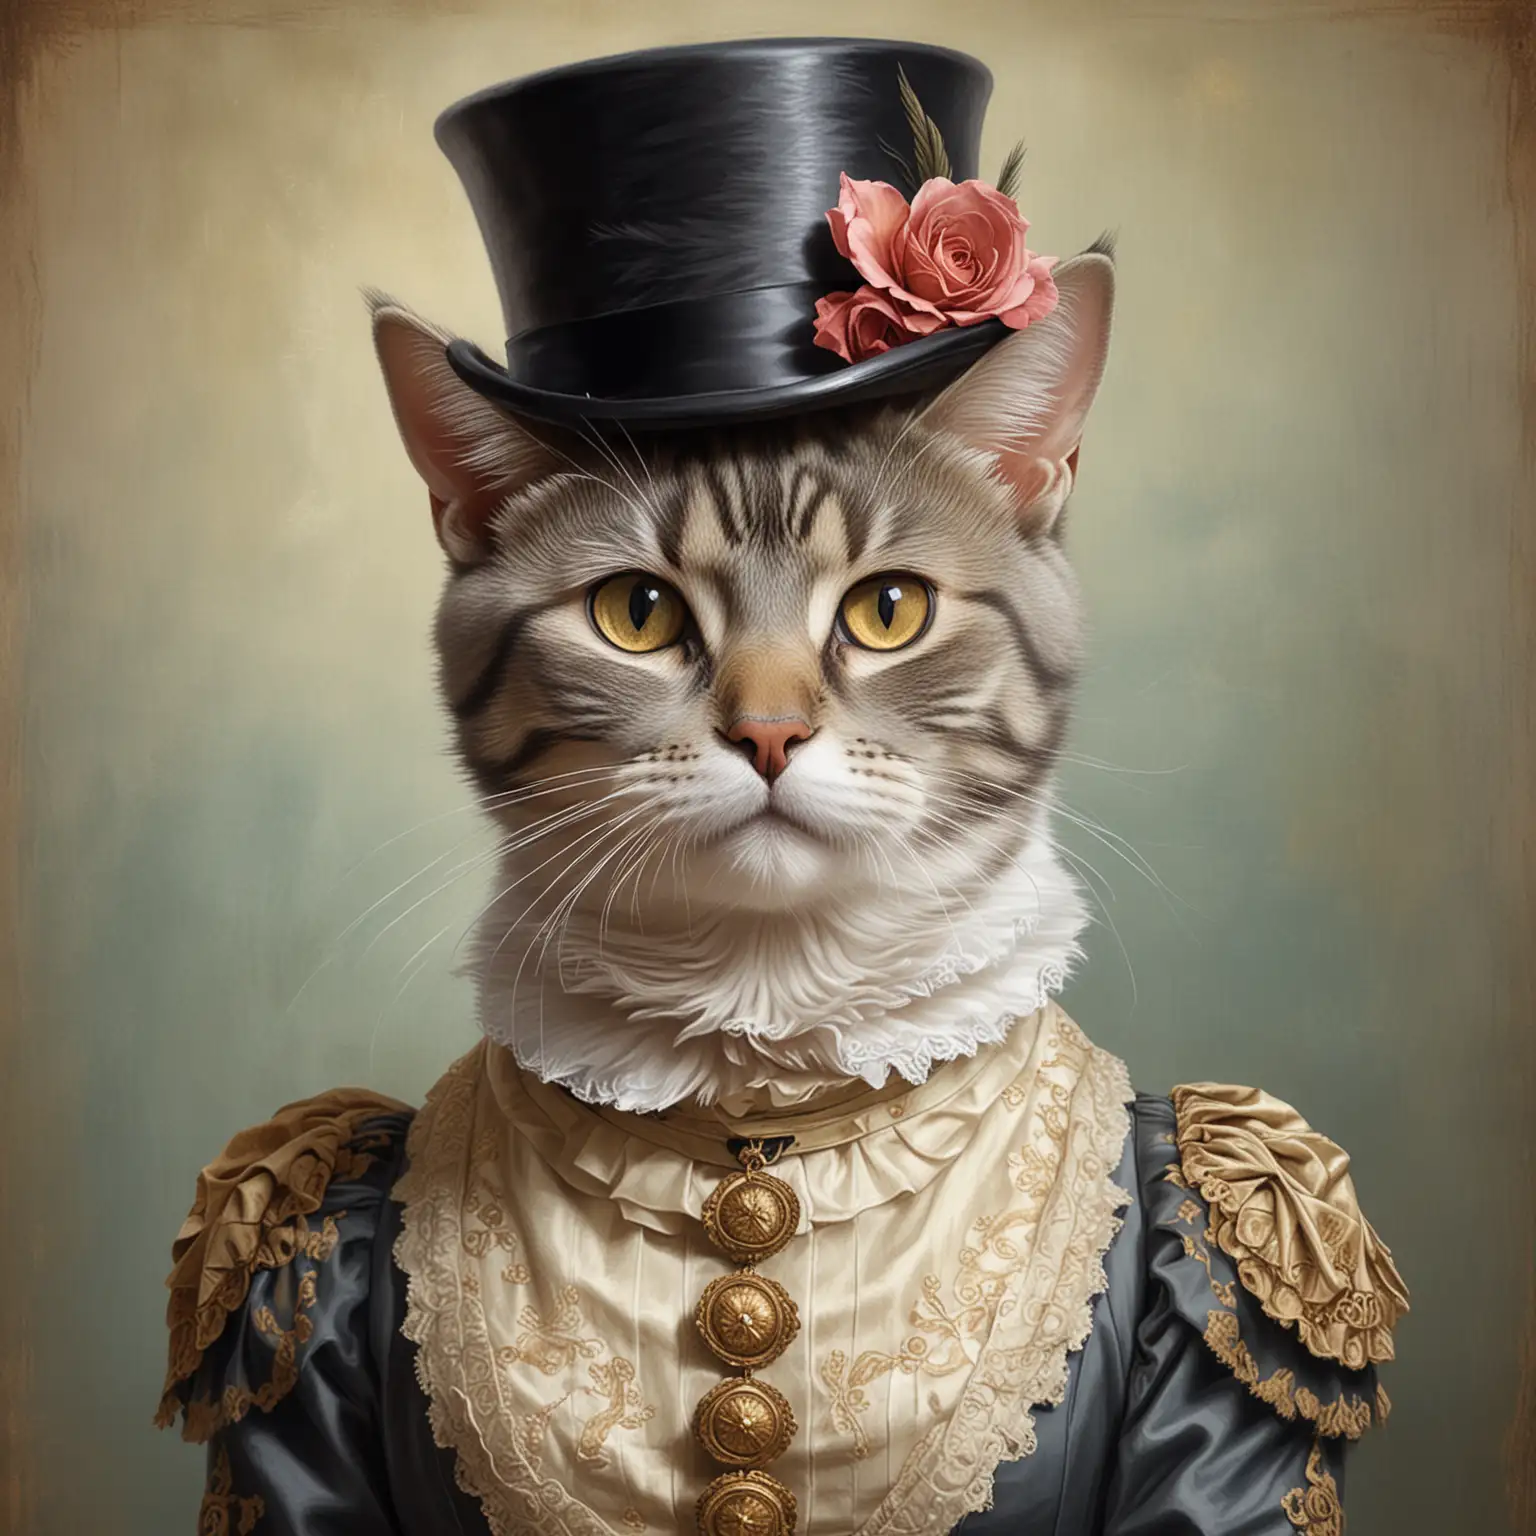 create a full figure drawing portrait, Fresco of a  female short-haired Scottish cat in a top hat and ornate female clothing, Victorian style, painting.